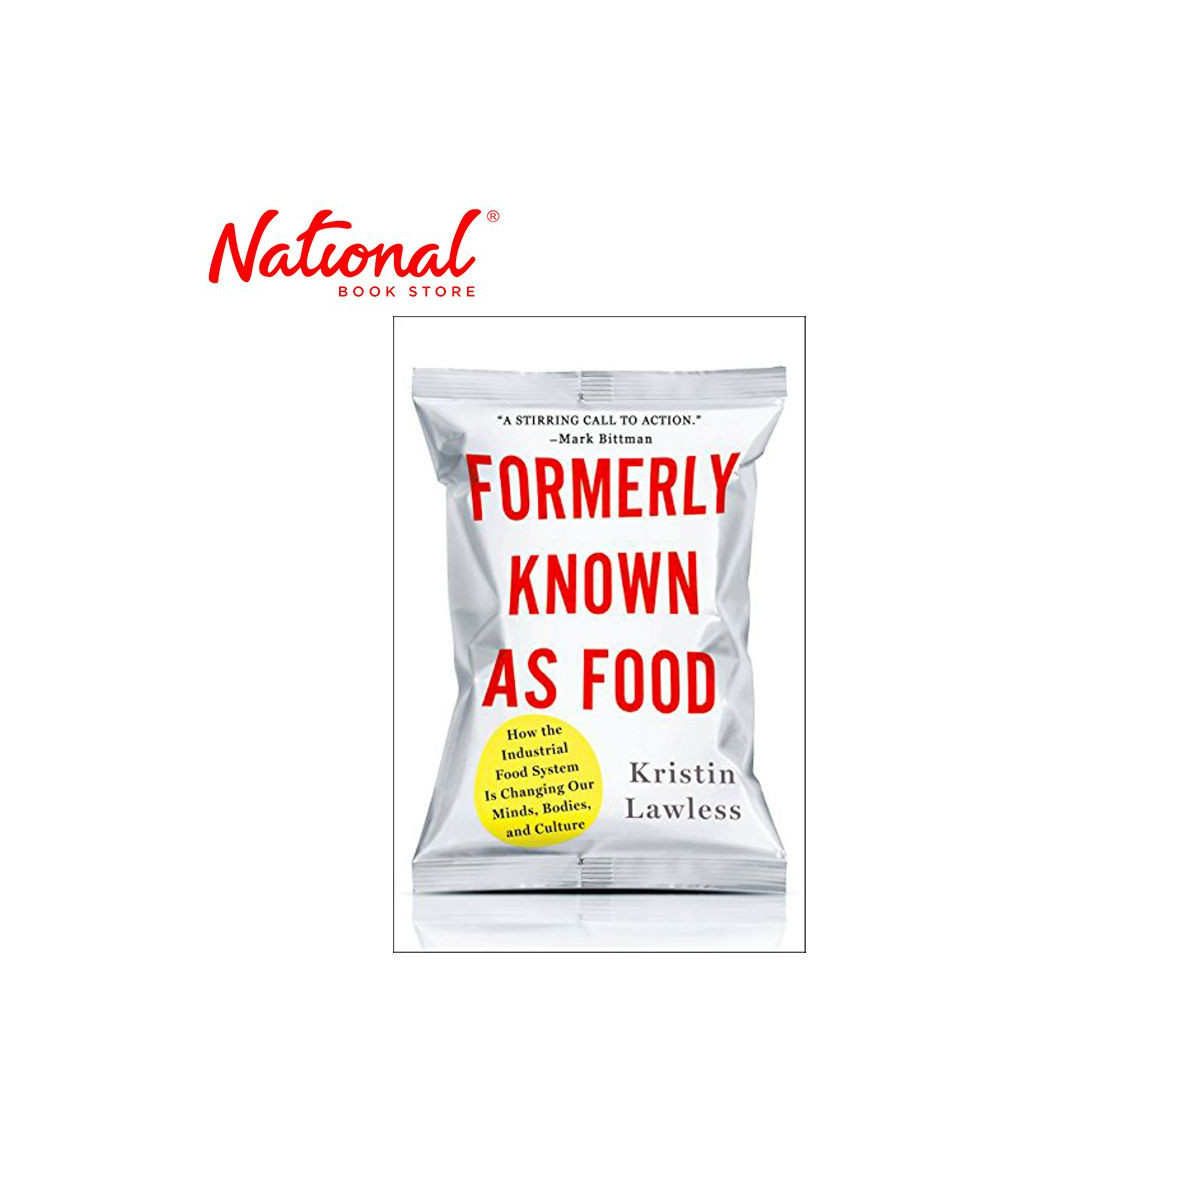 Formerly Known As Food Hardcover by Kristin Lawless - Health, Diet and Nutrition